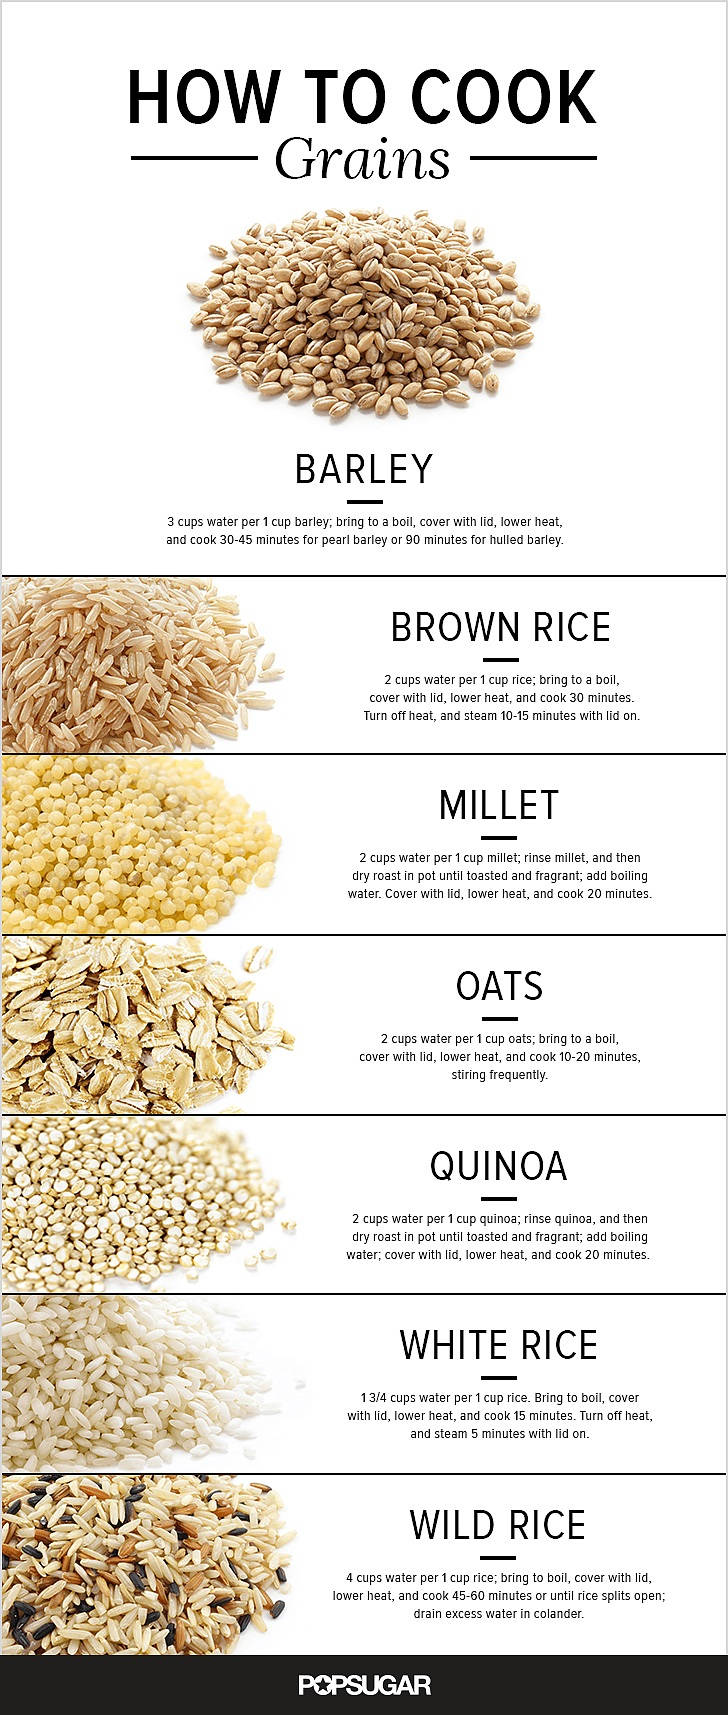 How to Cook Grains